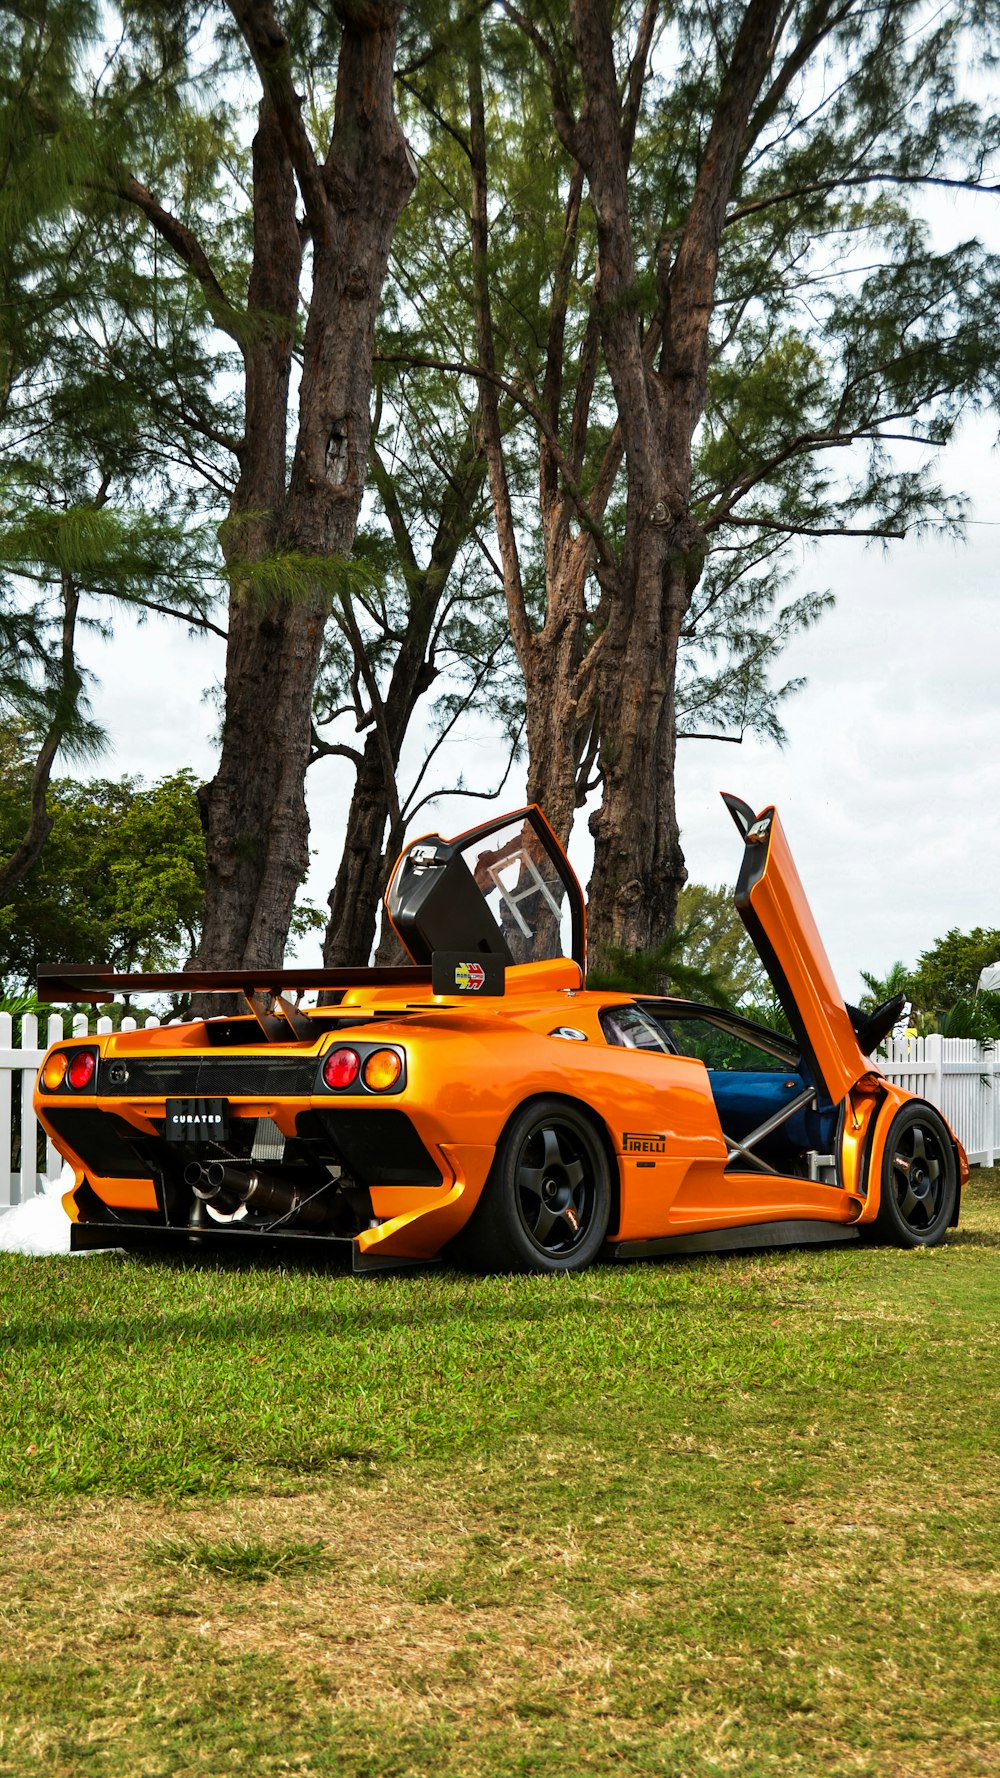 an orange sports car parked in the grass